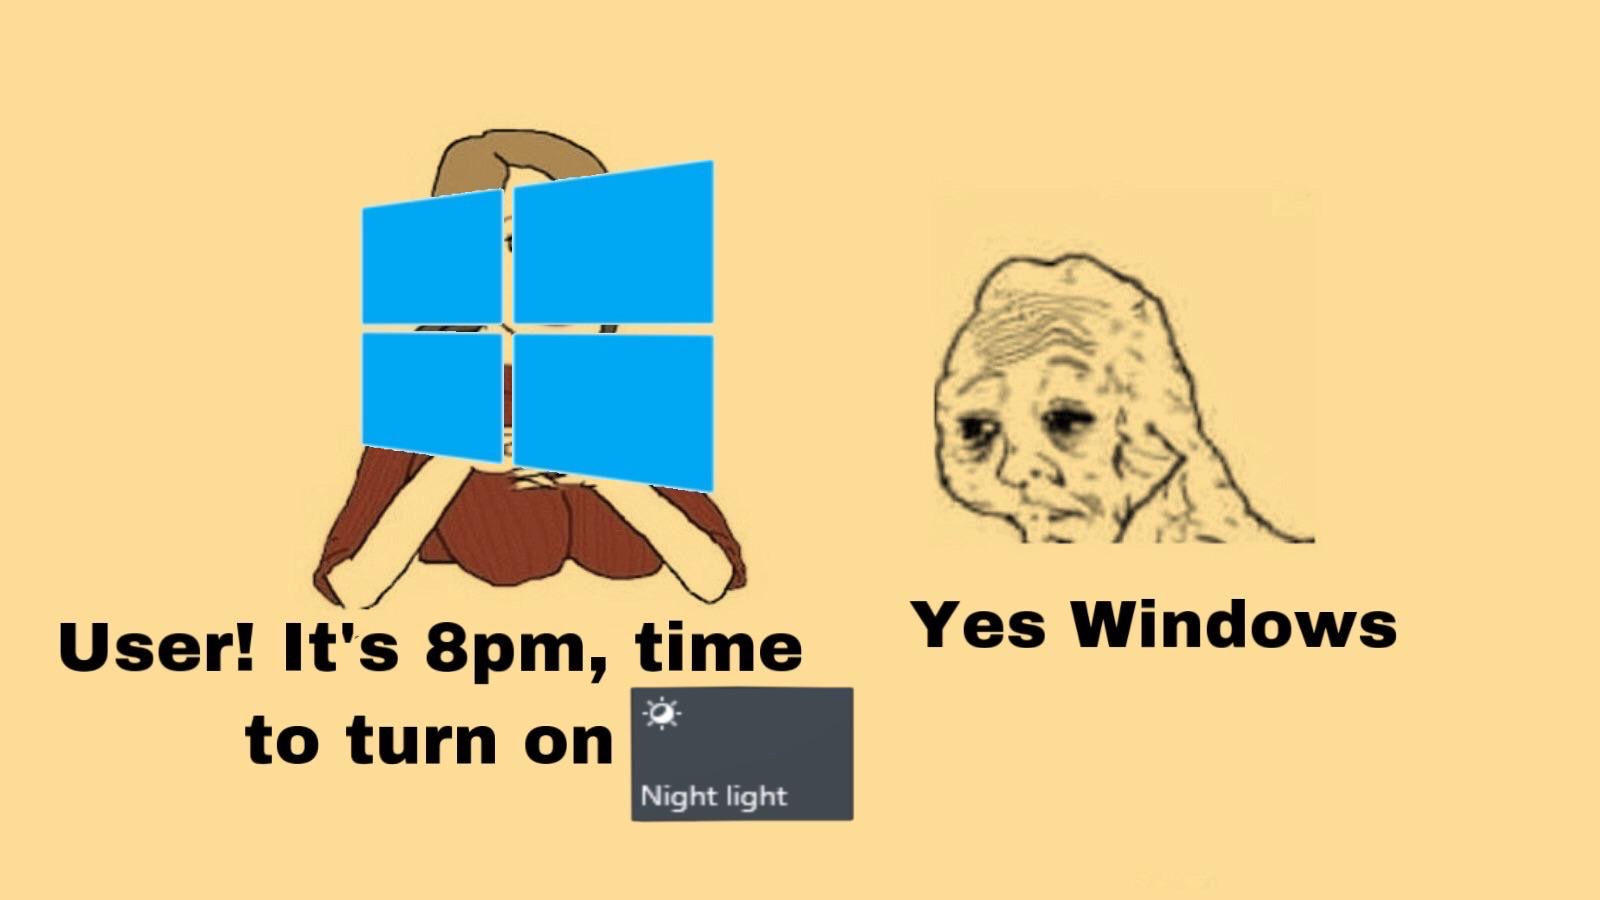 time for your dick flattening - User! It's 8pm, time Yes Windows to turn on Night light